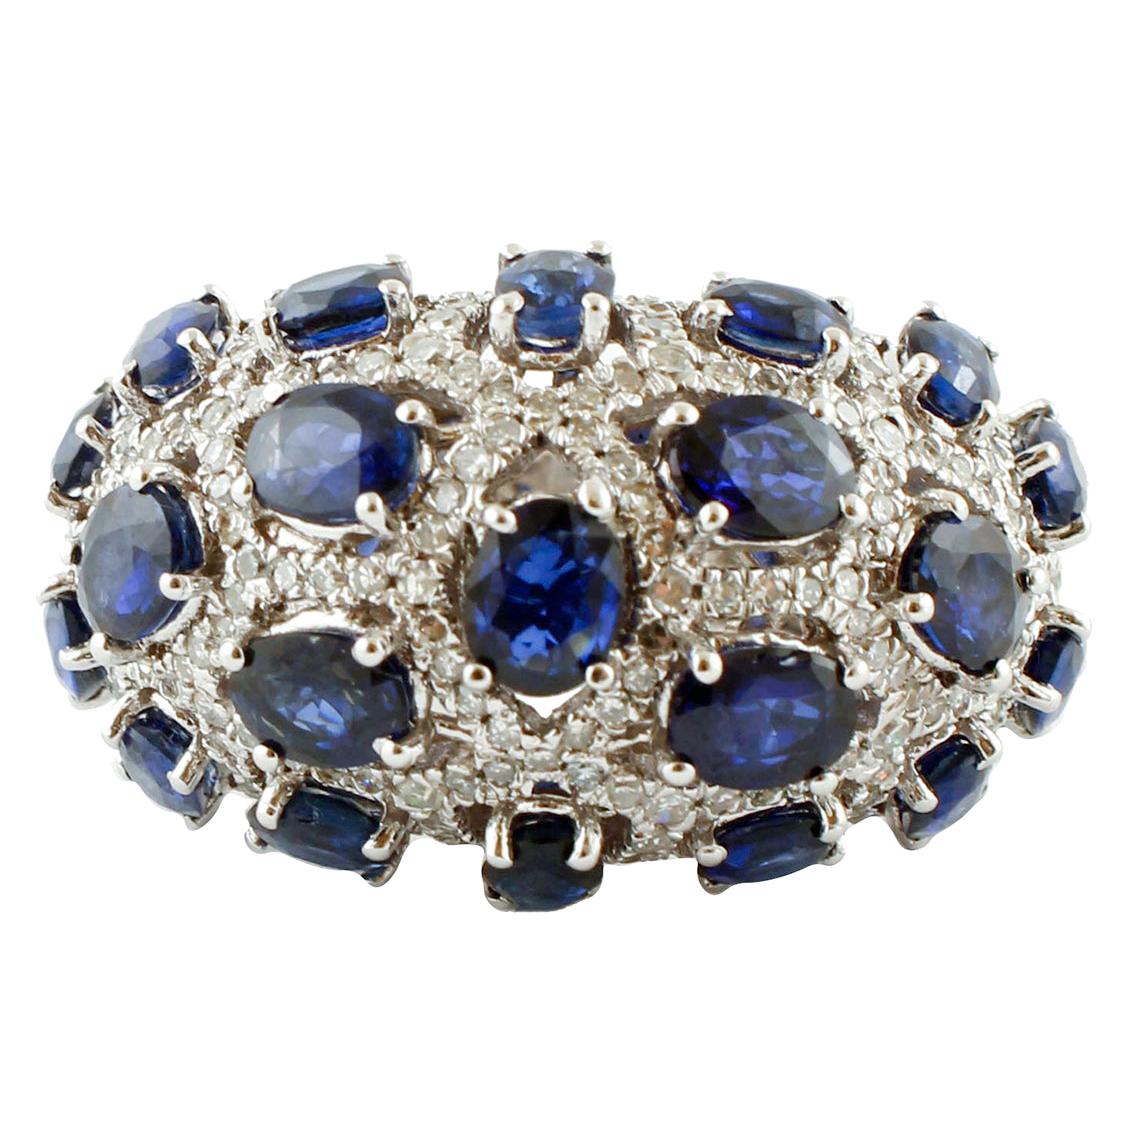 Diamonds and Blue Sapphires, White Gold Band Ring